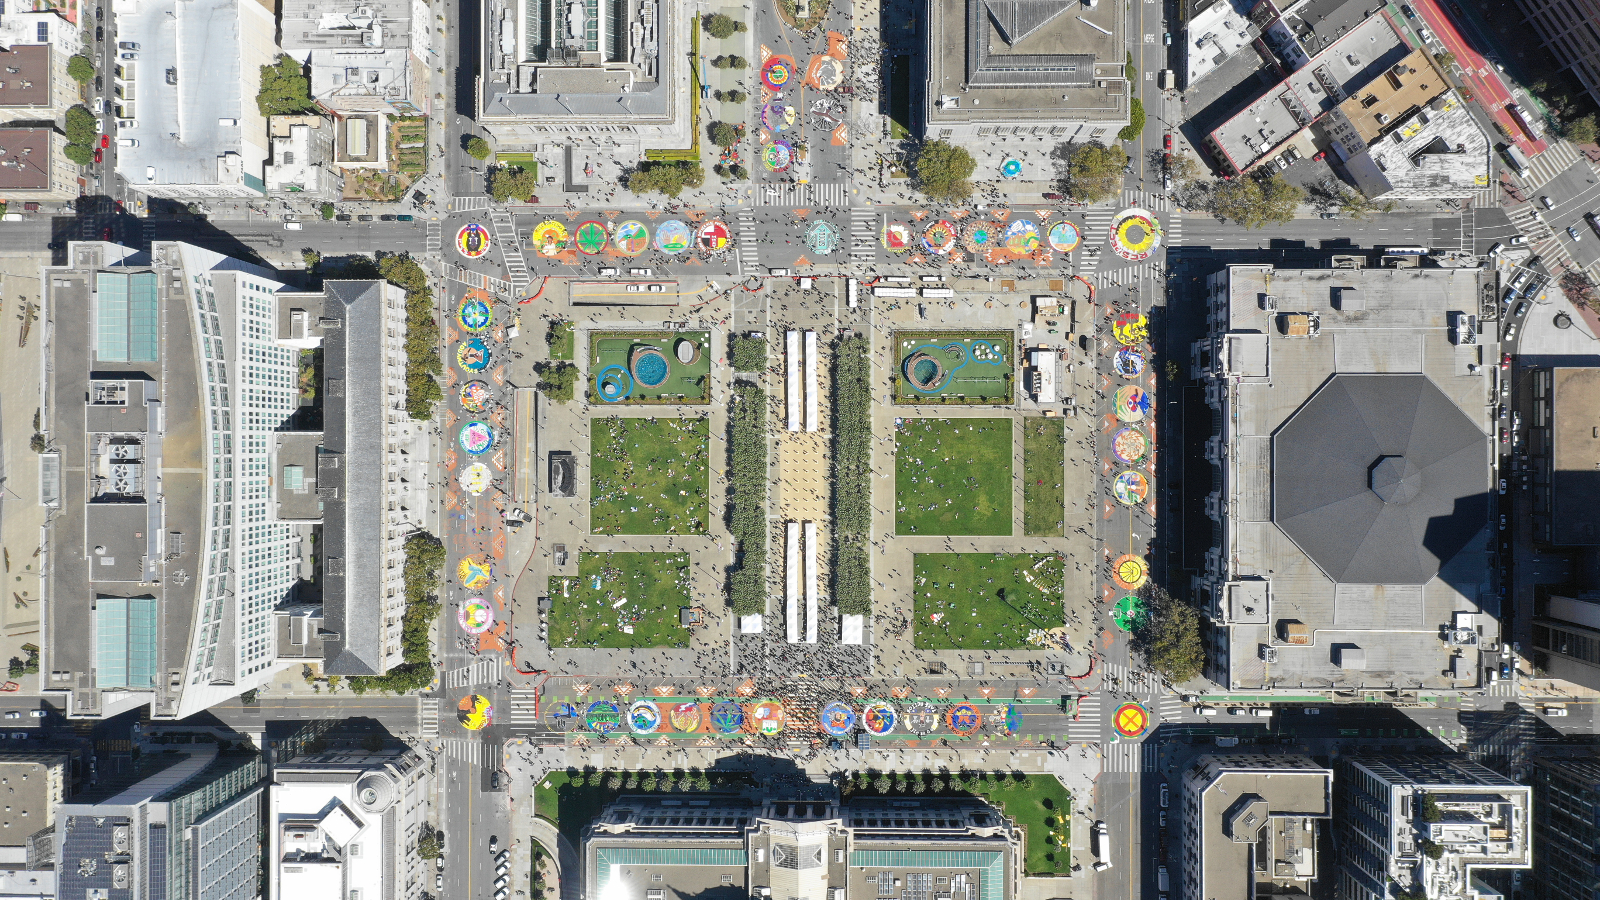 Civic Center street mural, aerial view, Rise for Climate, Jobs and Justice, 2018-09-08. Photo credit: 350.org (CC BY-NC-SA 2.0).